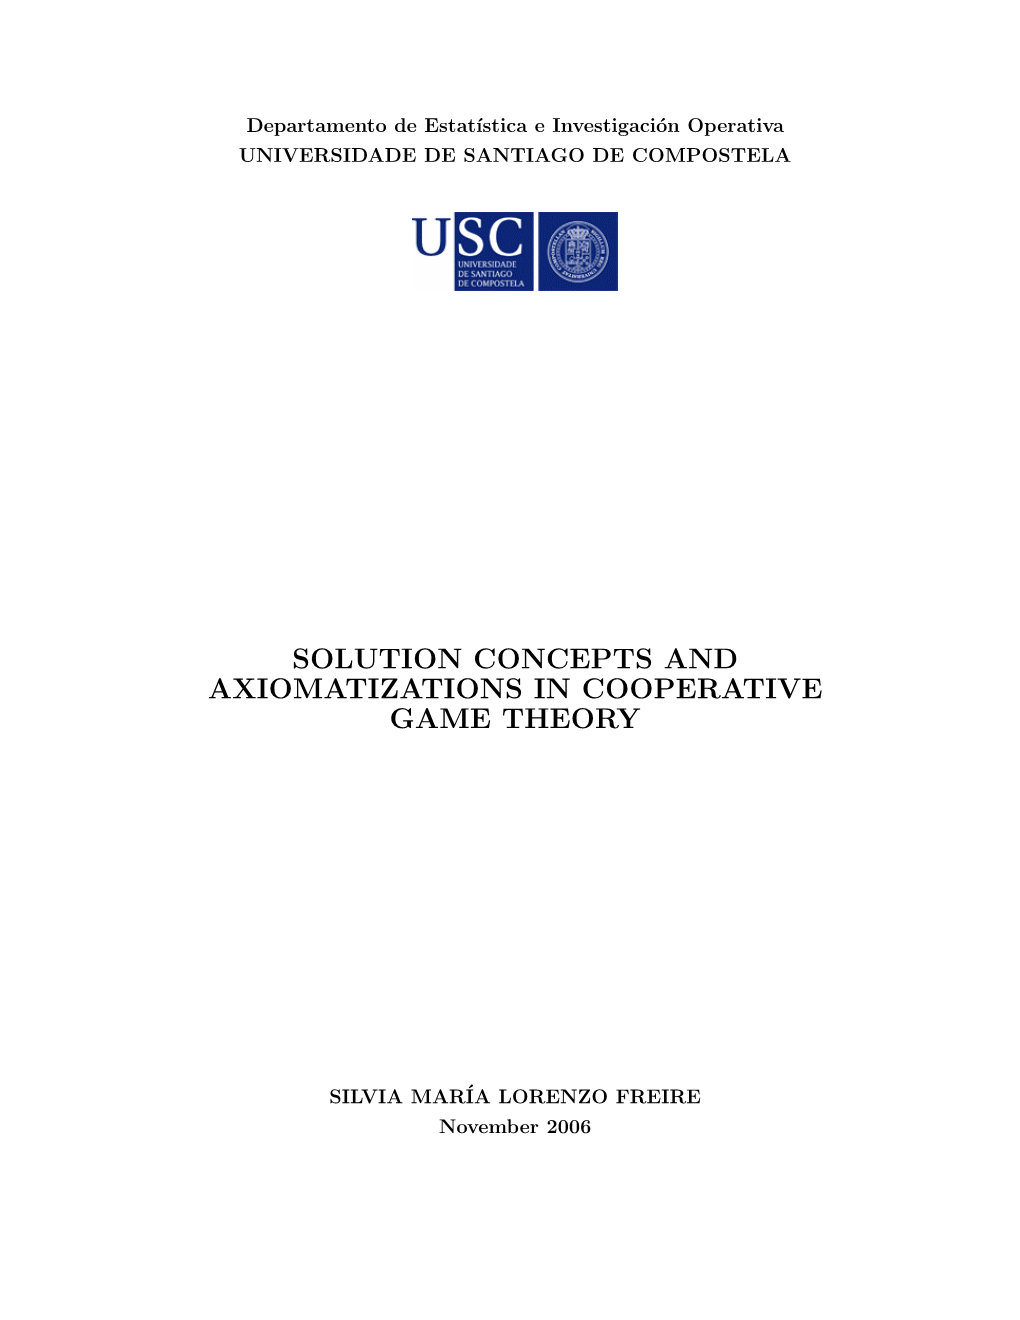 Solution Concepts and Axiomatizations in Cooperative Game Theory